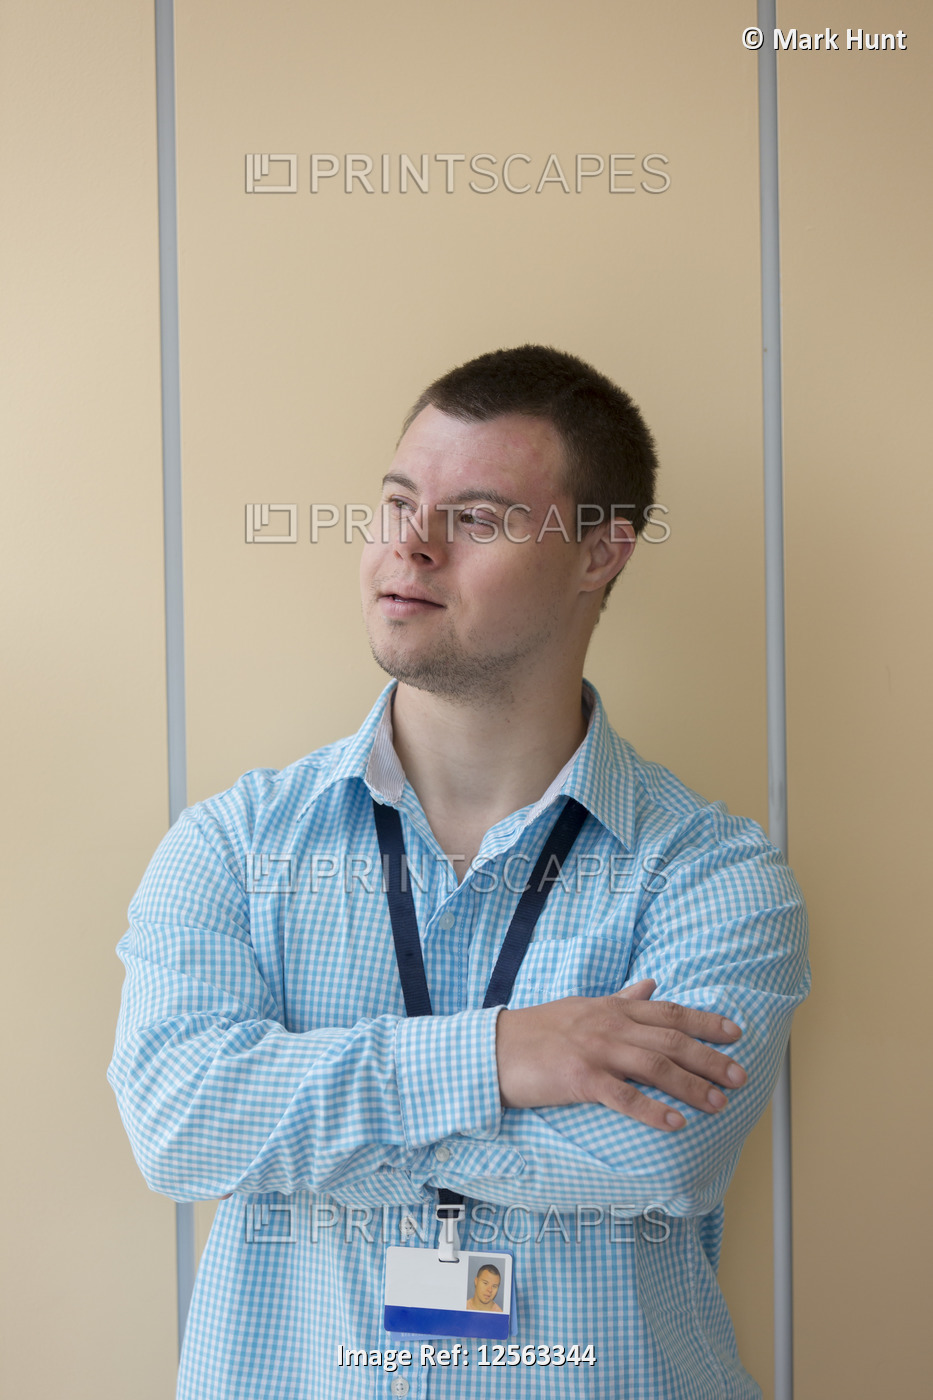 Man with Down Syndrome working in a hospital